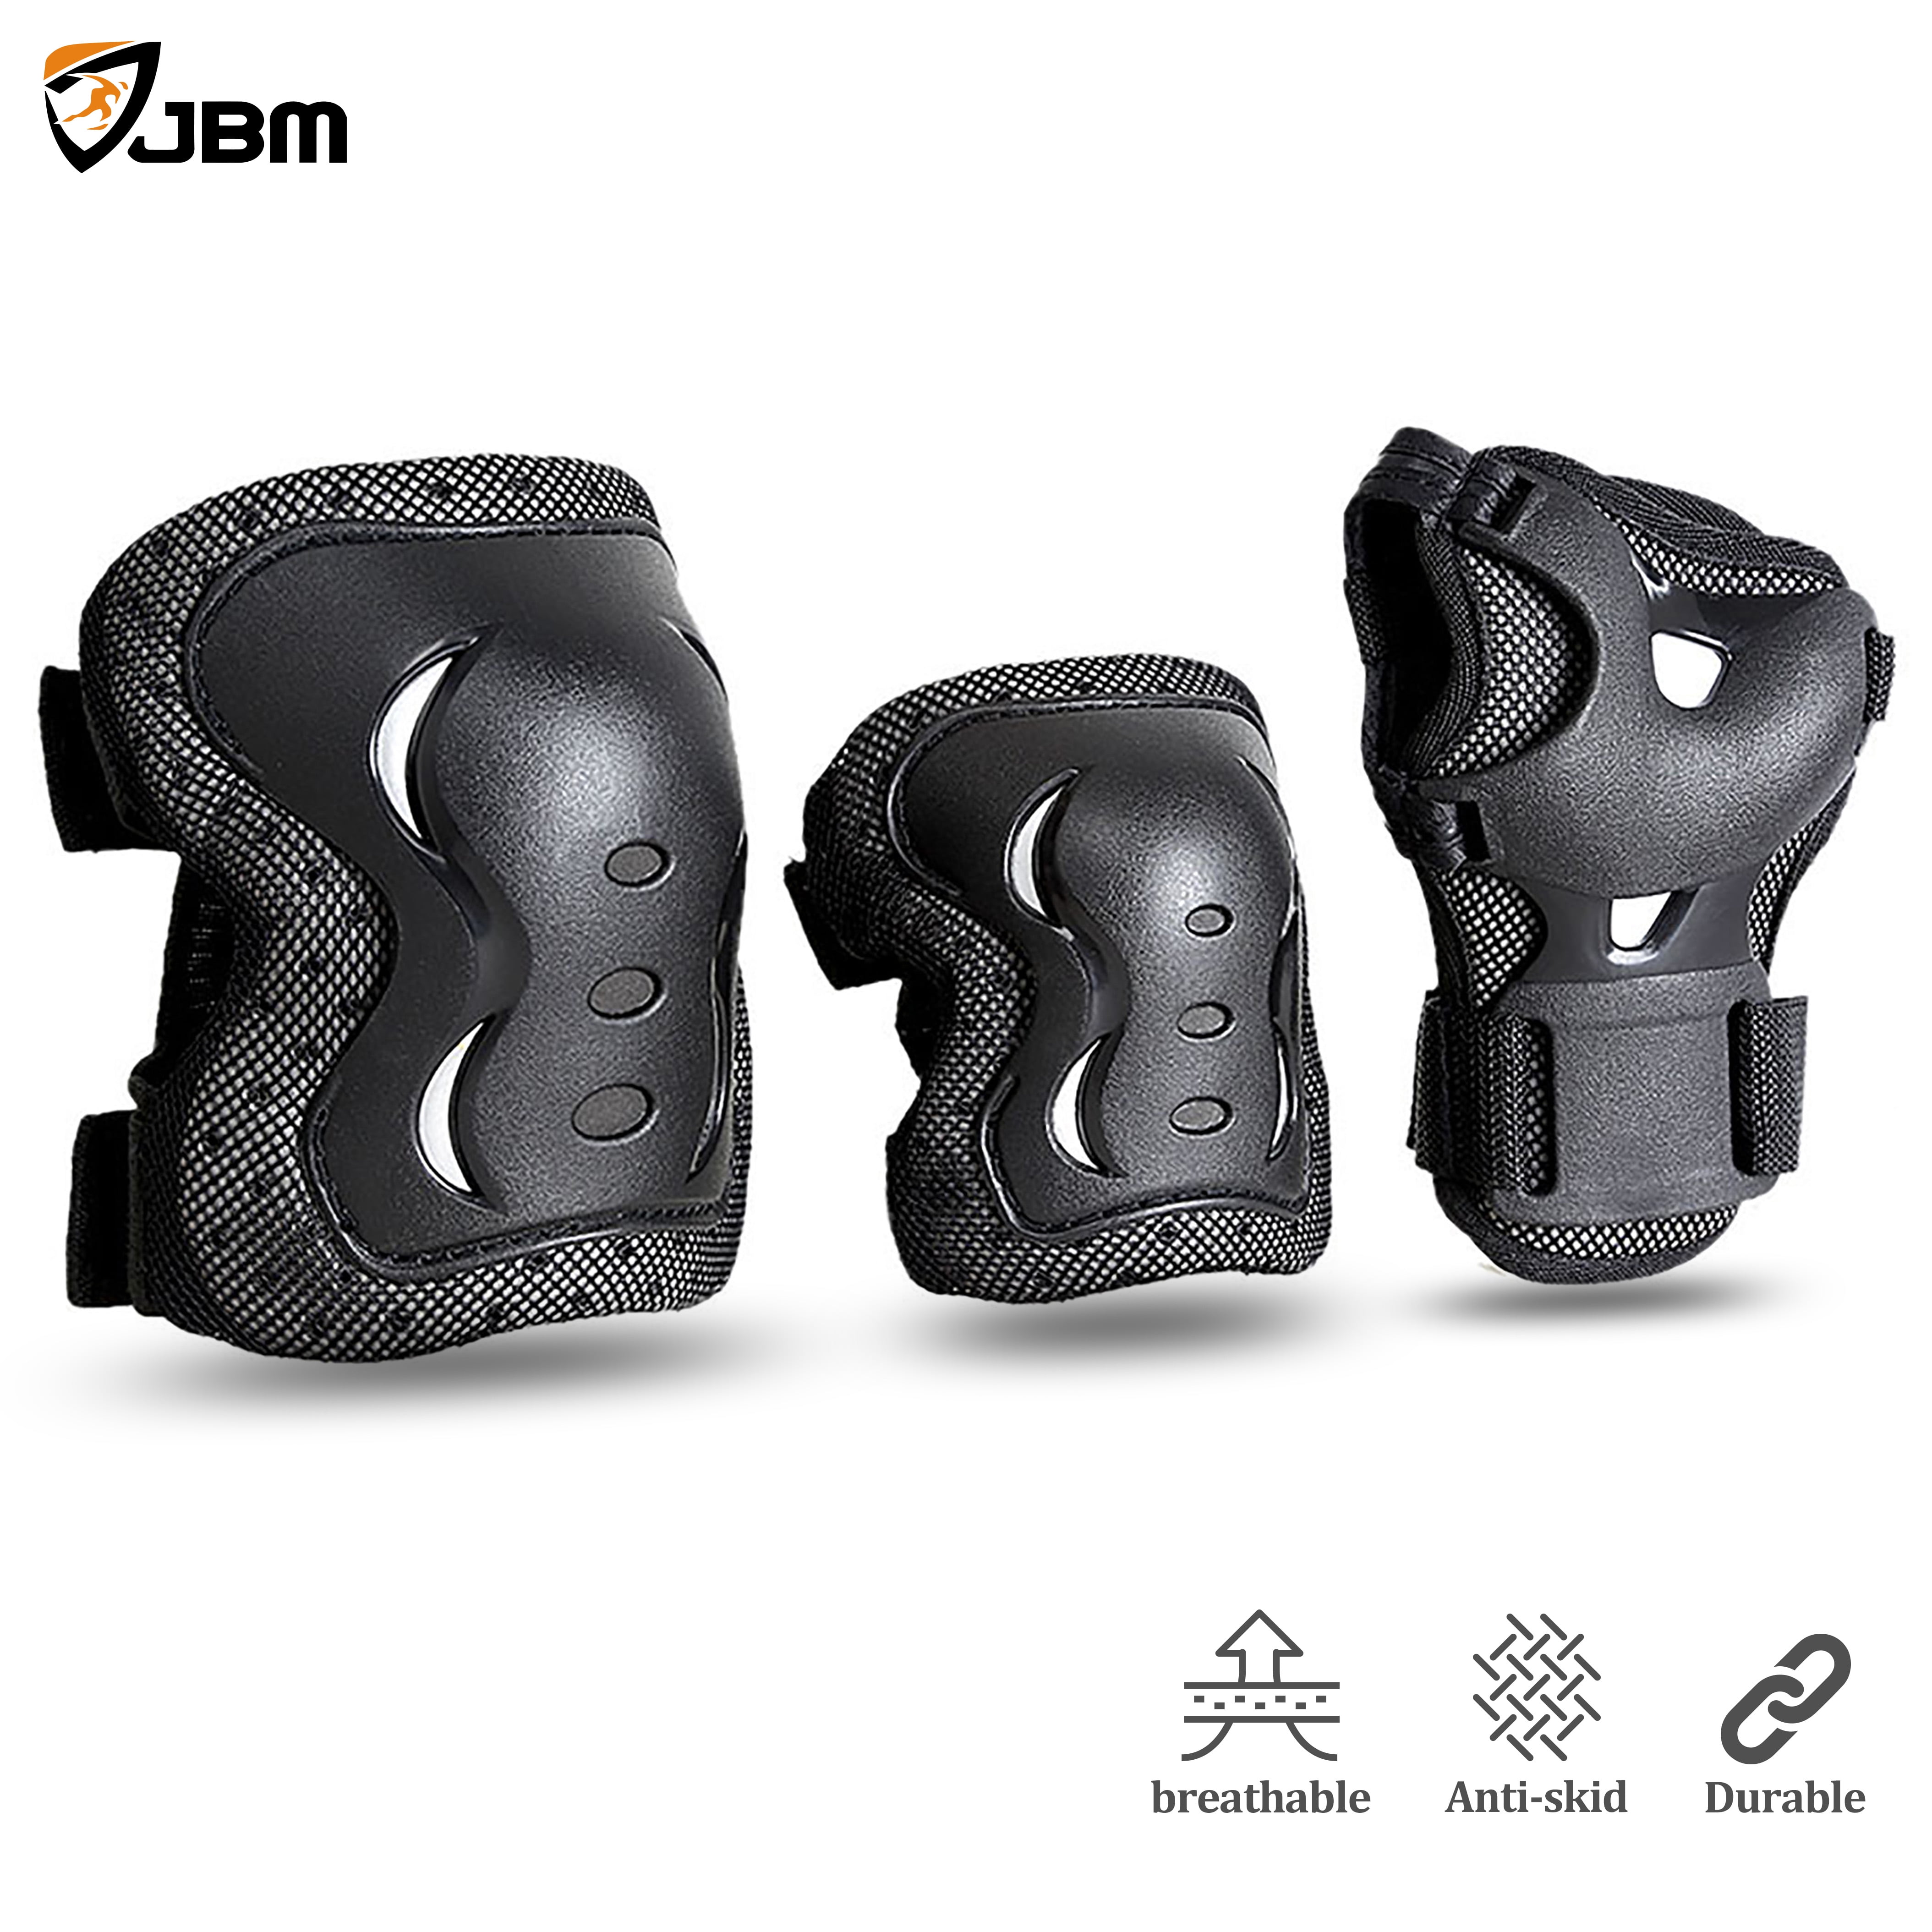 Knee Supports Wrist Palm Guards Protective Knee Saver with Hard Shell Thick Padding Sports Set for 3-9 Years Old 6 Pcs Eruner Kids Roller Blading Skateboard Knee Elbow Pads